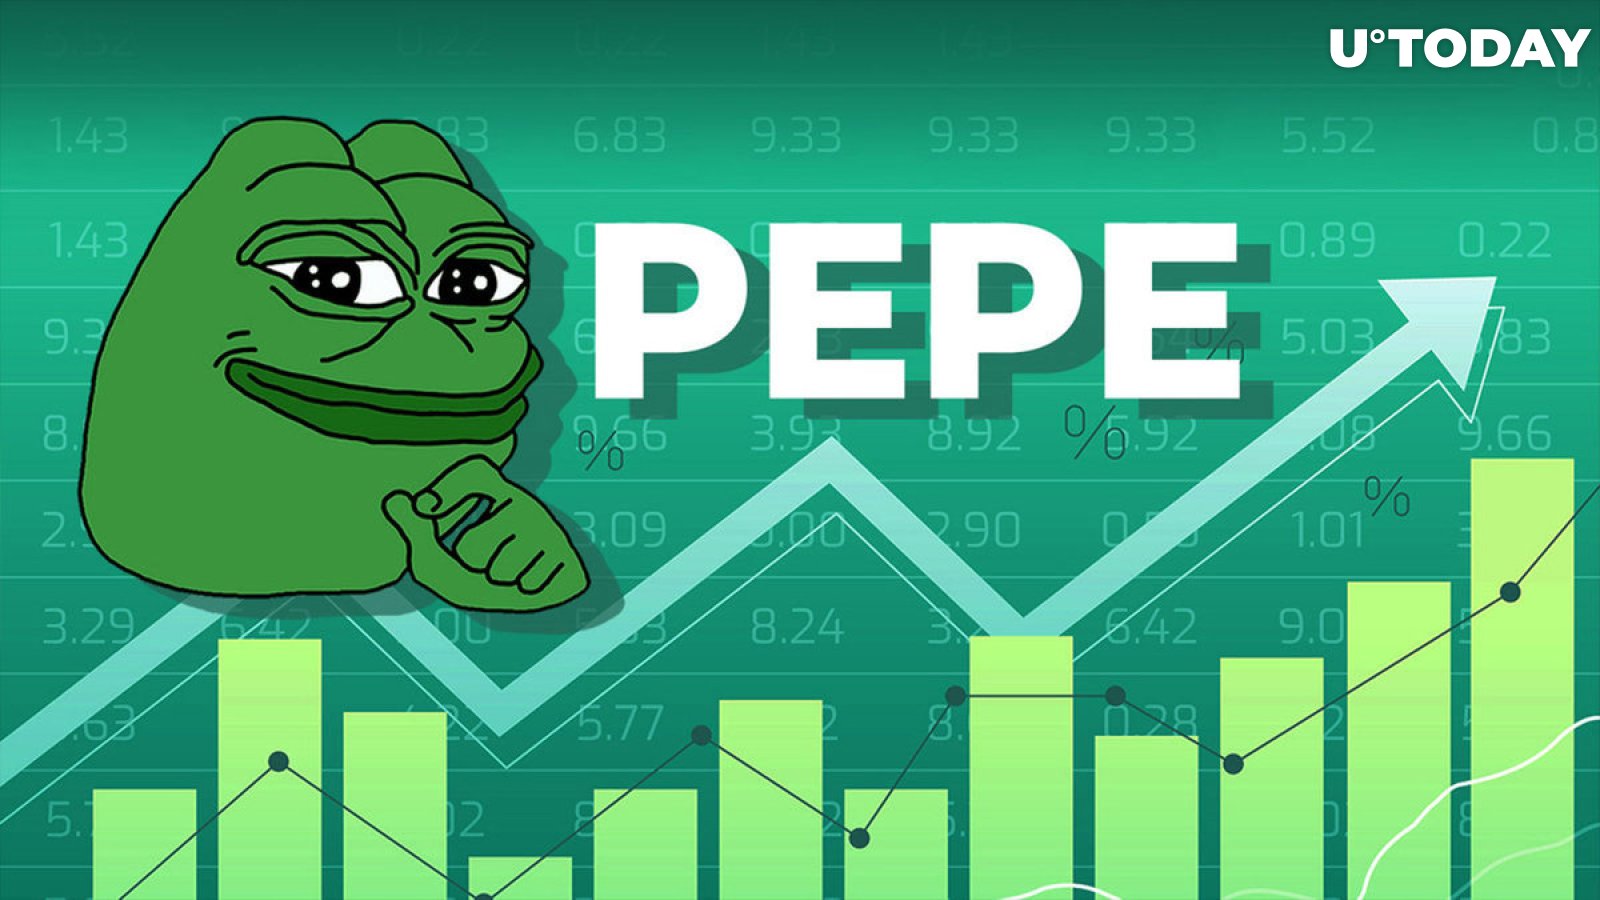 PEPE Joins Bitcoin's Monster Rally as Price Jumps 43%